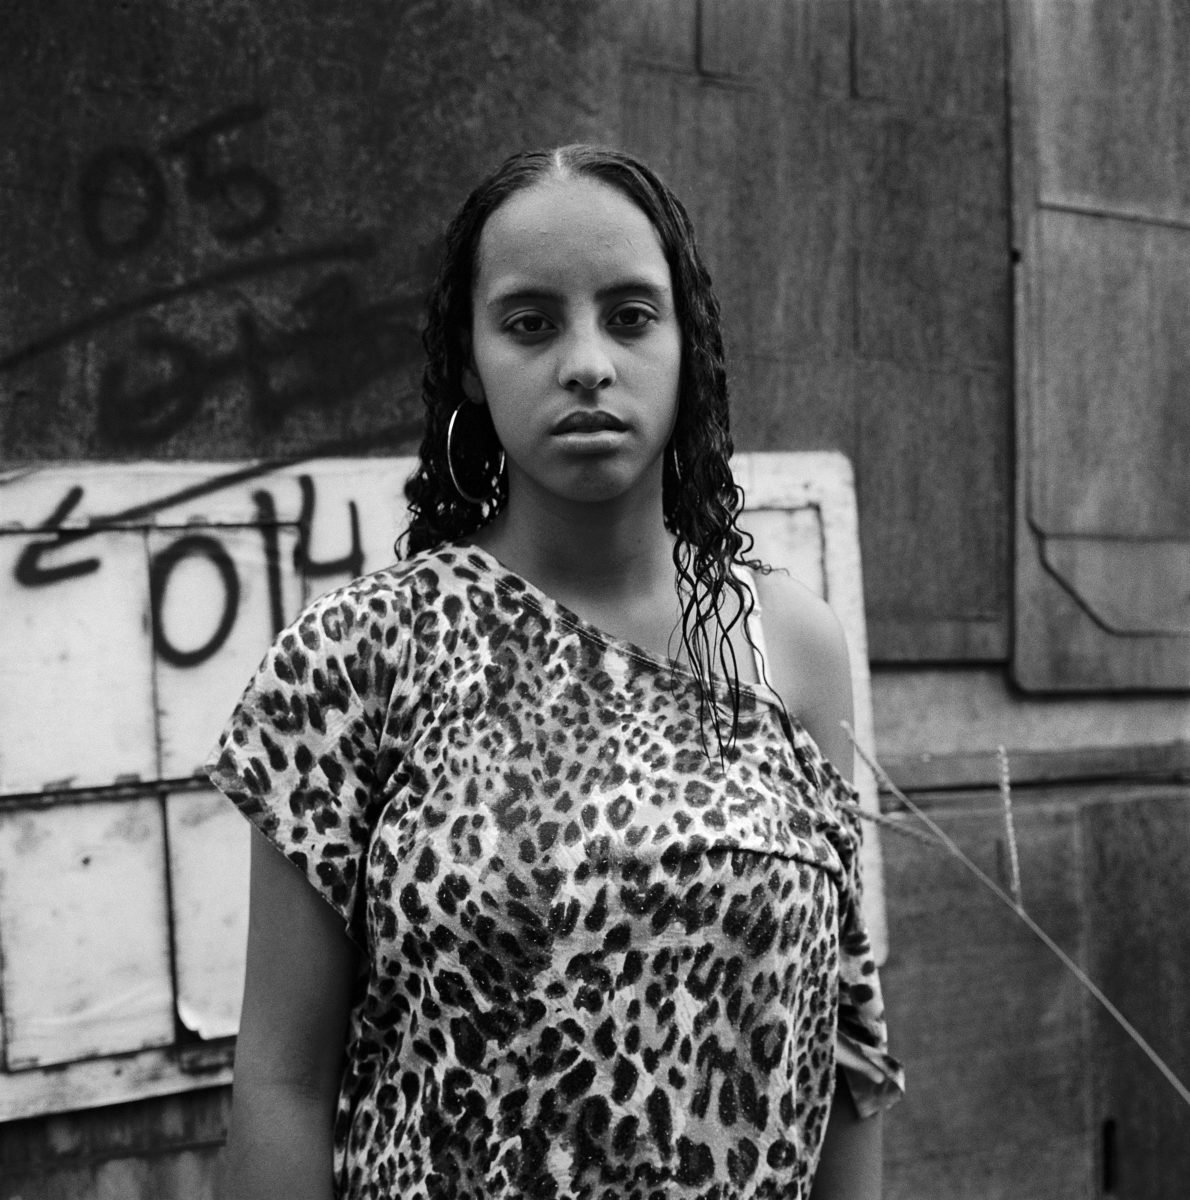 Ludovic Carème, Suelen in Front of Her House, Favela Agua Branca, São Paulo, 2009. Courtesy the artist